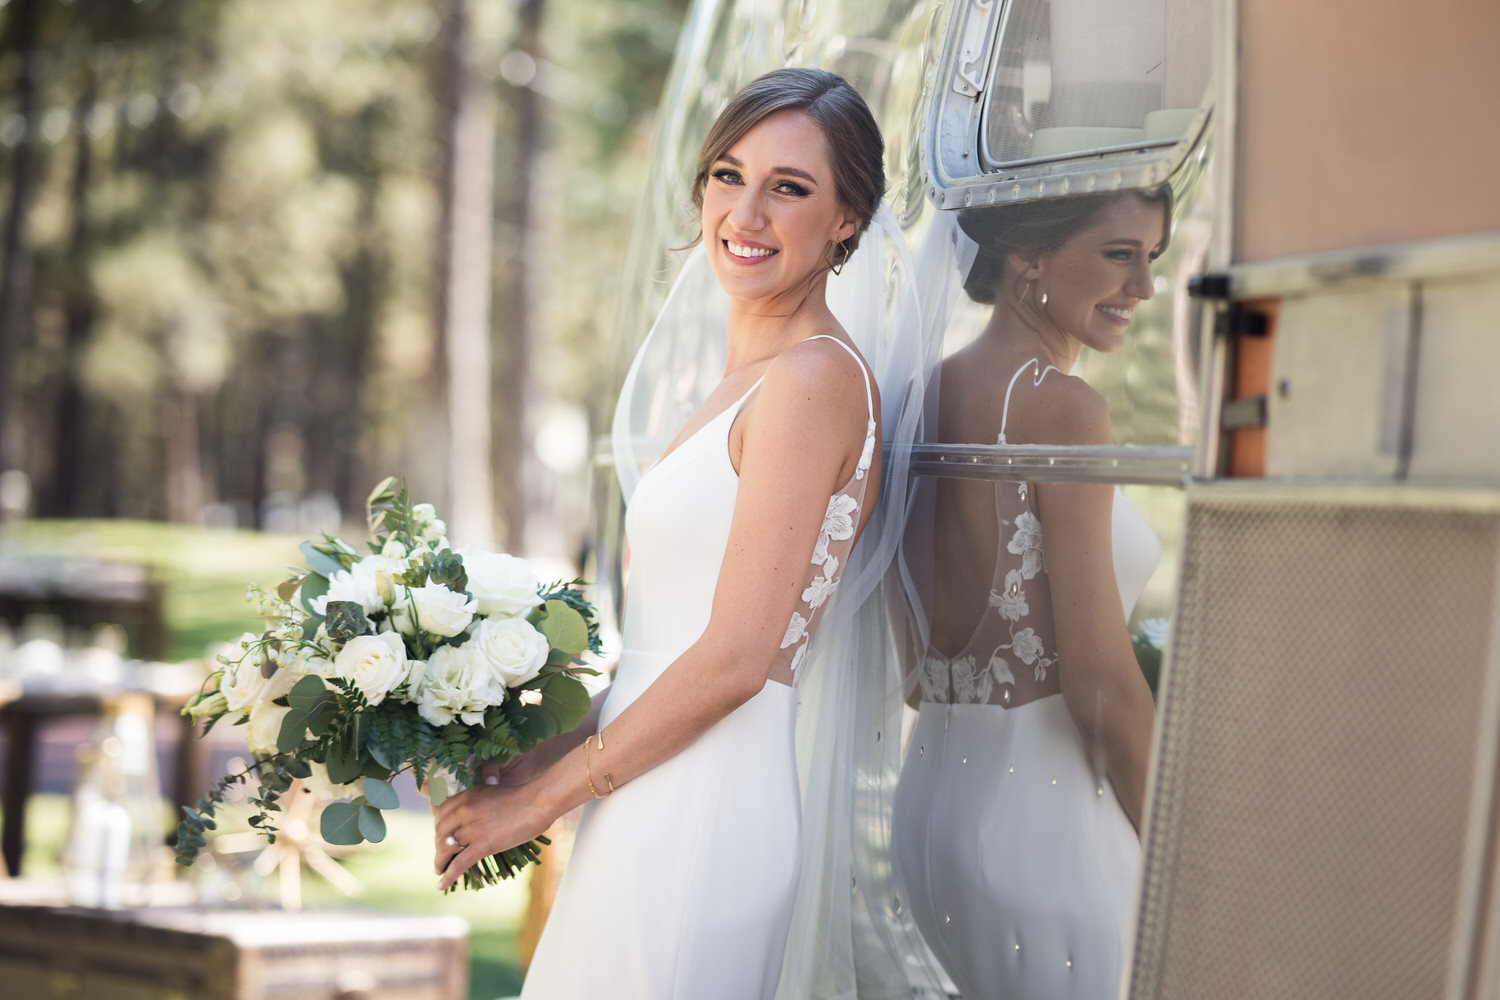 A bride poses for a portrait next to a silver airstream trailer.